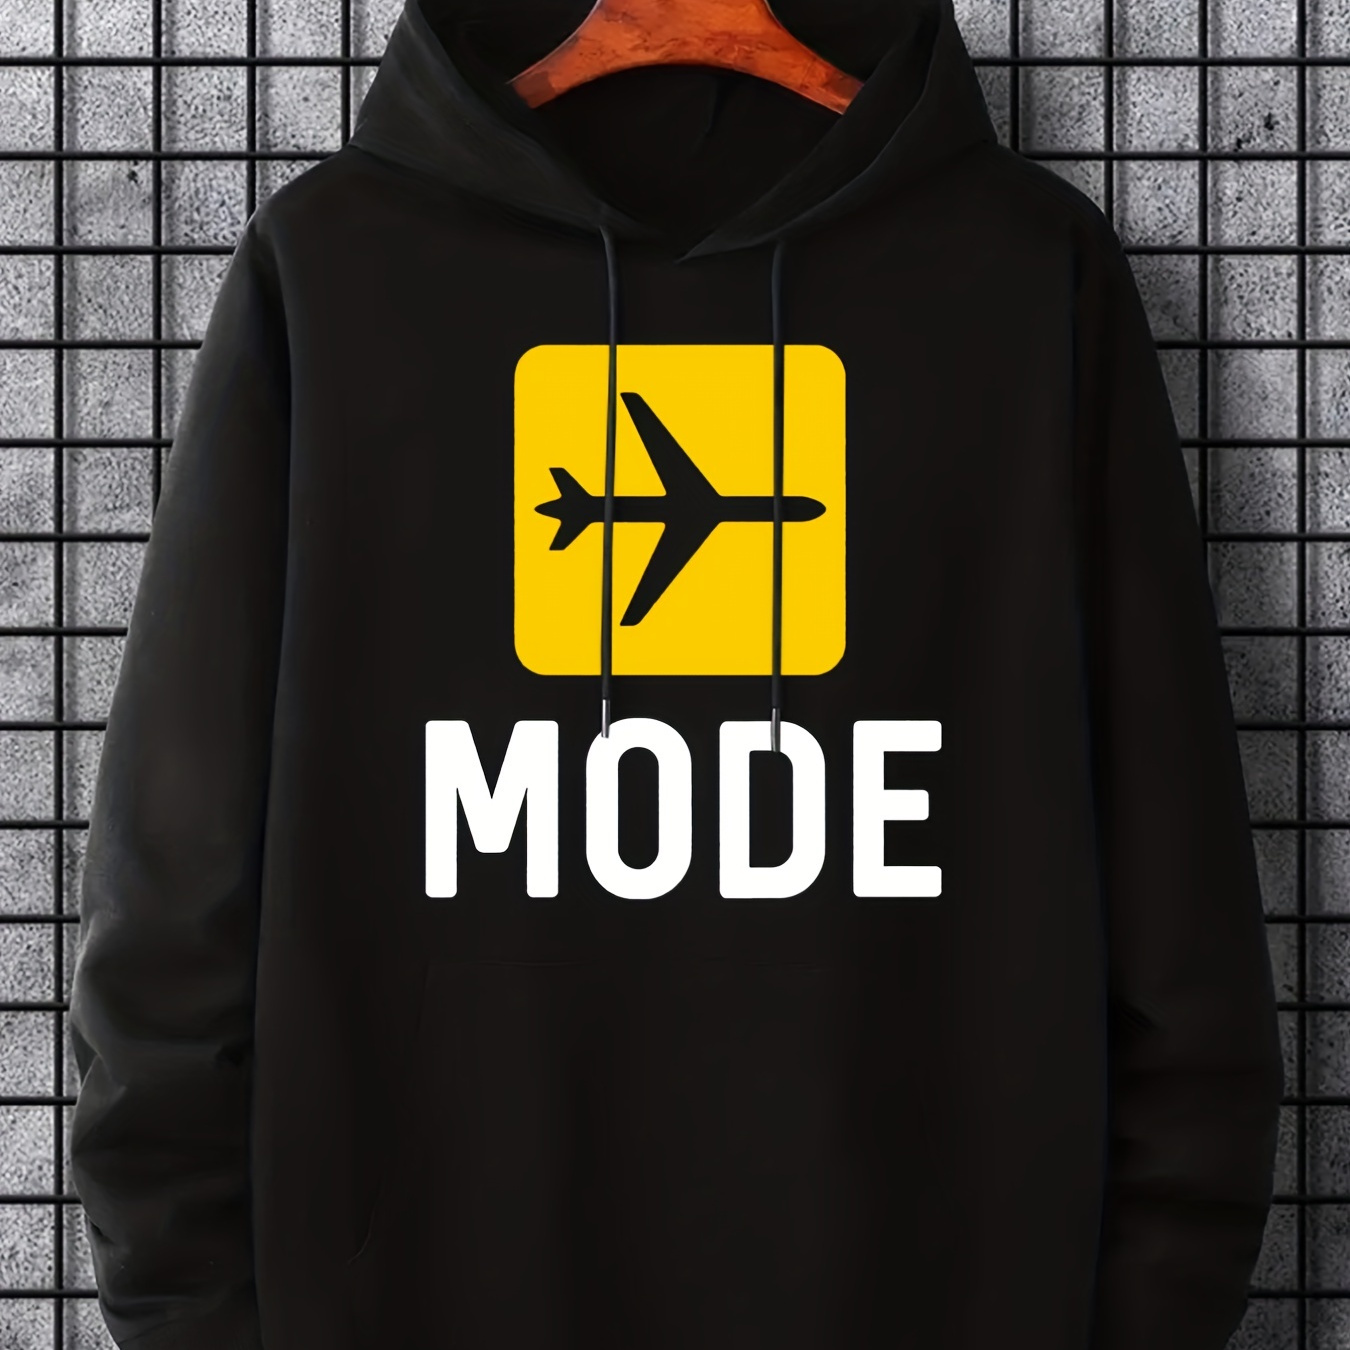 

Hoodies For Men, Airplane Mode Graphic Hoodie, Men’s Casual Pullover Hooded Sweatshirt With Kangaroo Pocket For Spring Fall, As Gifts